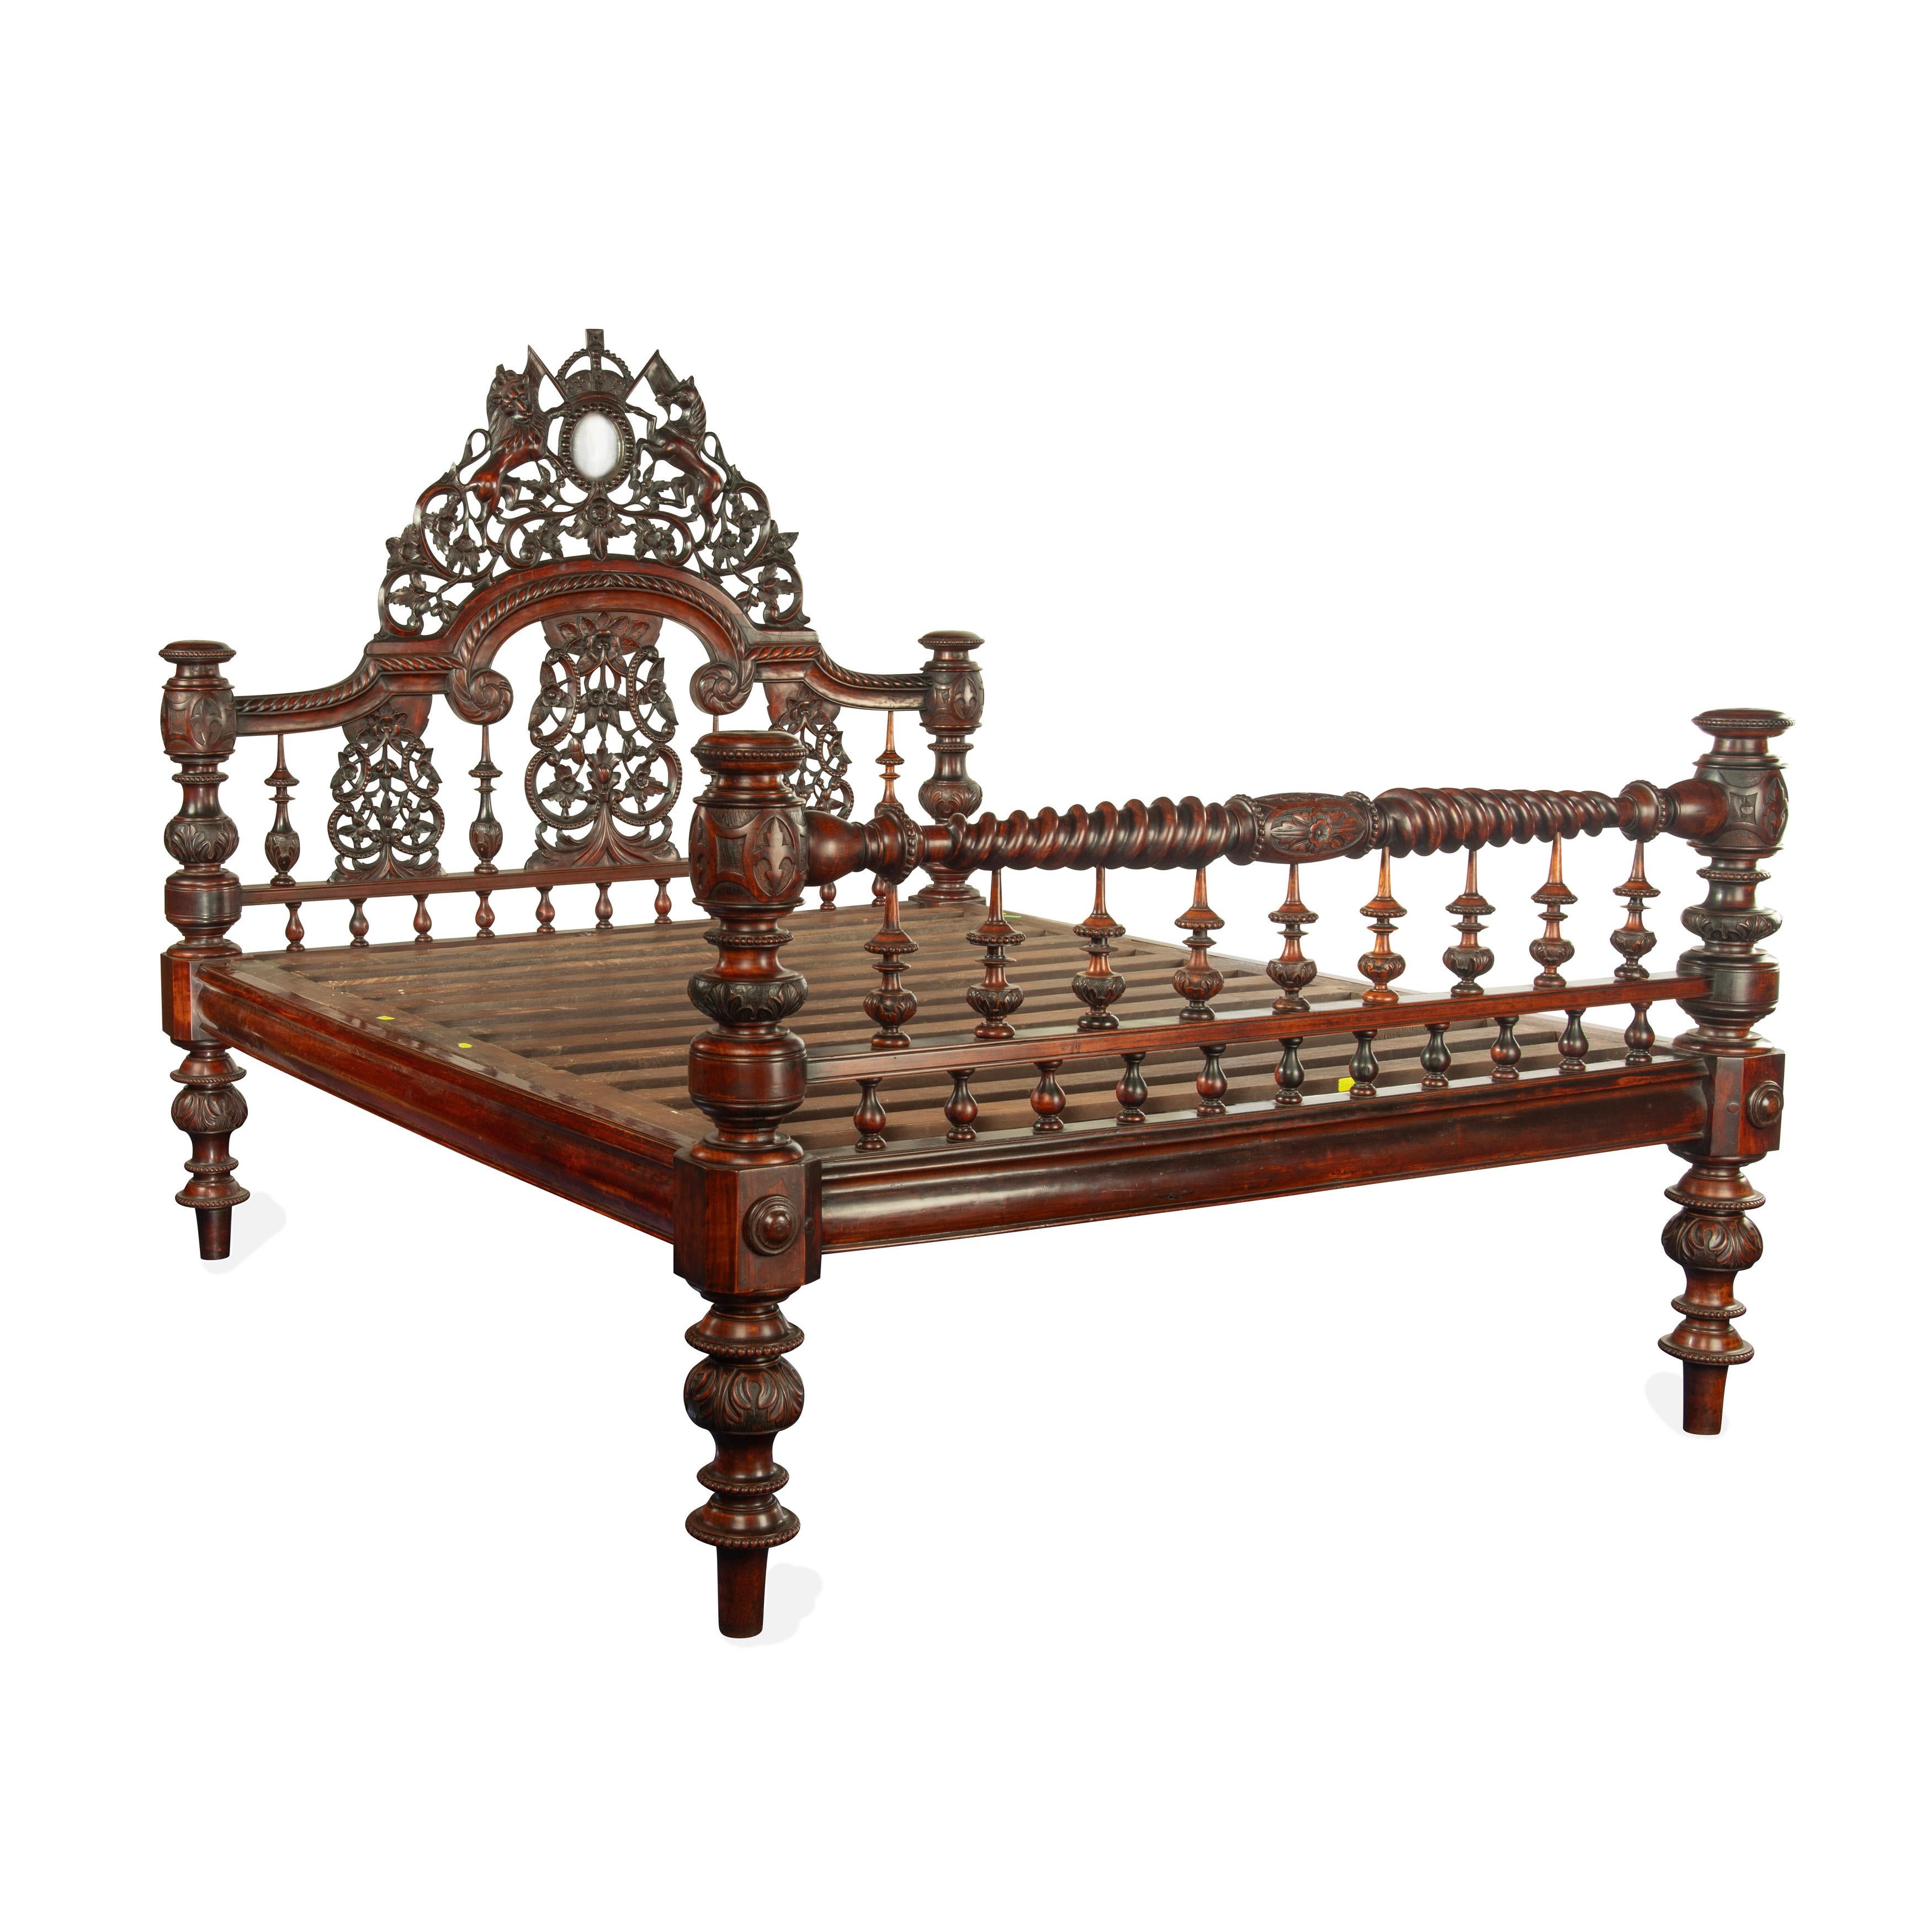 An impressive sissoo wood Anglo-Indian four poster bed, of rectangular form with a central openwork cresting, and splat, showing a naïve carving of the Coat of Arms of Great Britain, the lion and unicorn holding flags and flanking a Royal crown